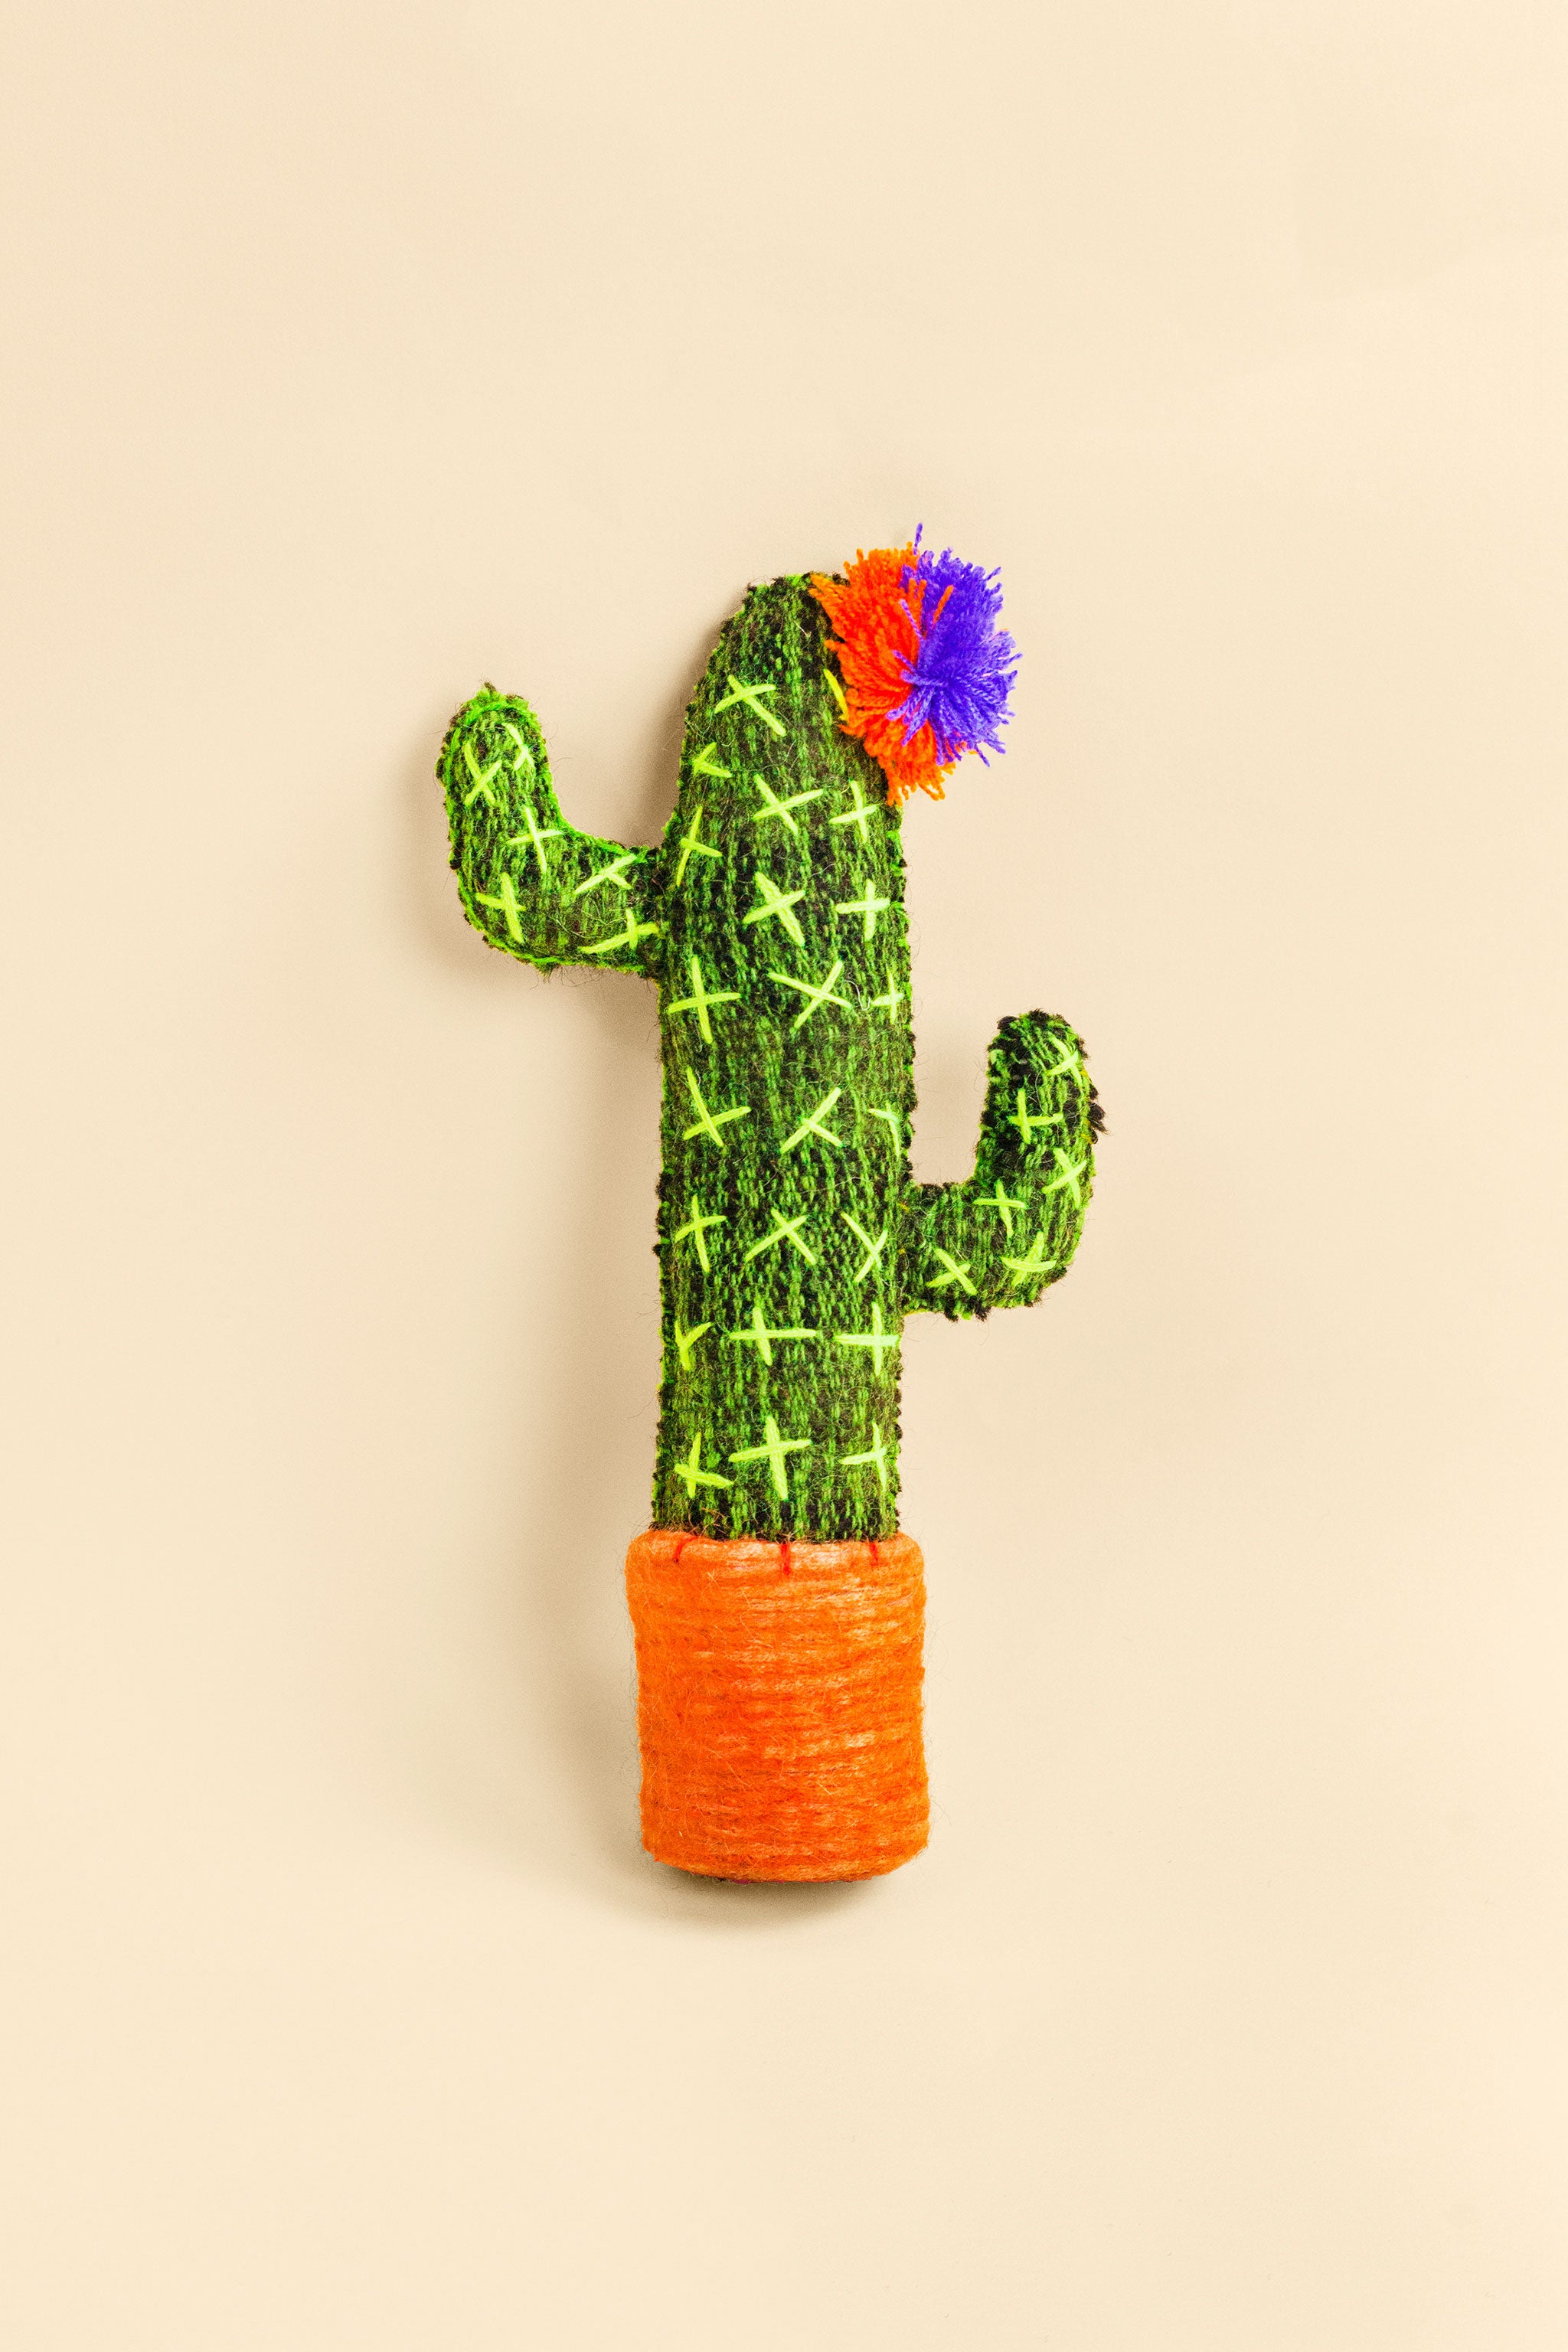 Standing green felt cactus plush toy with hand-embroidered thorns and a colorful pom pom flower on top.